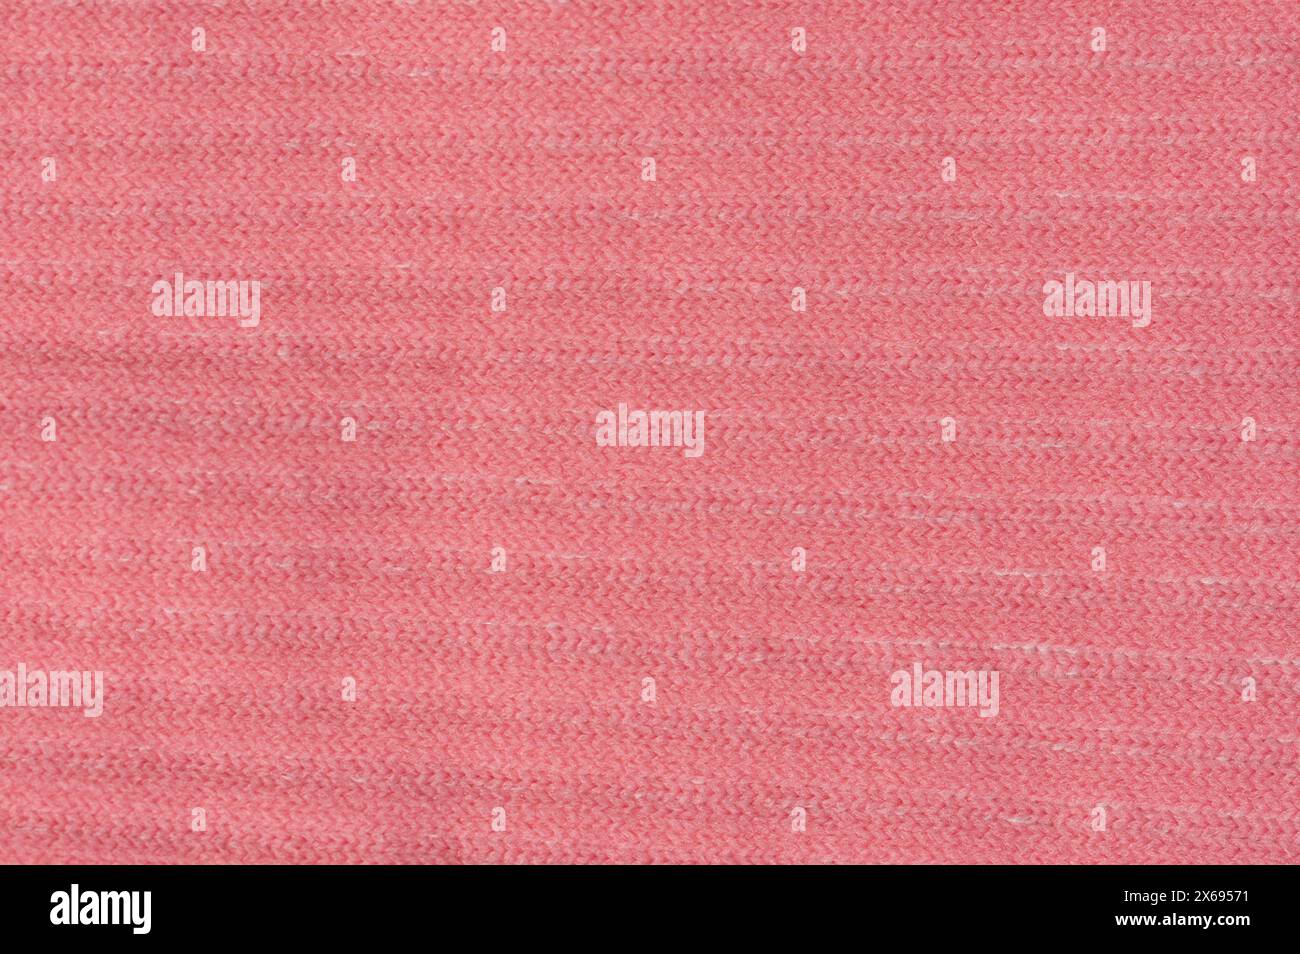 Pink color fabric pattern macro close up view Stock Photo